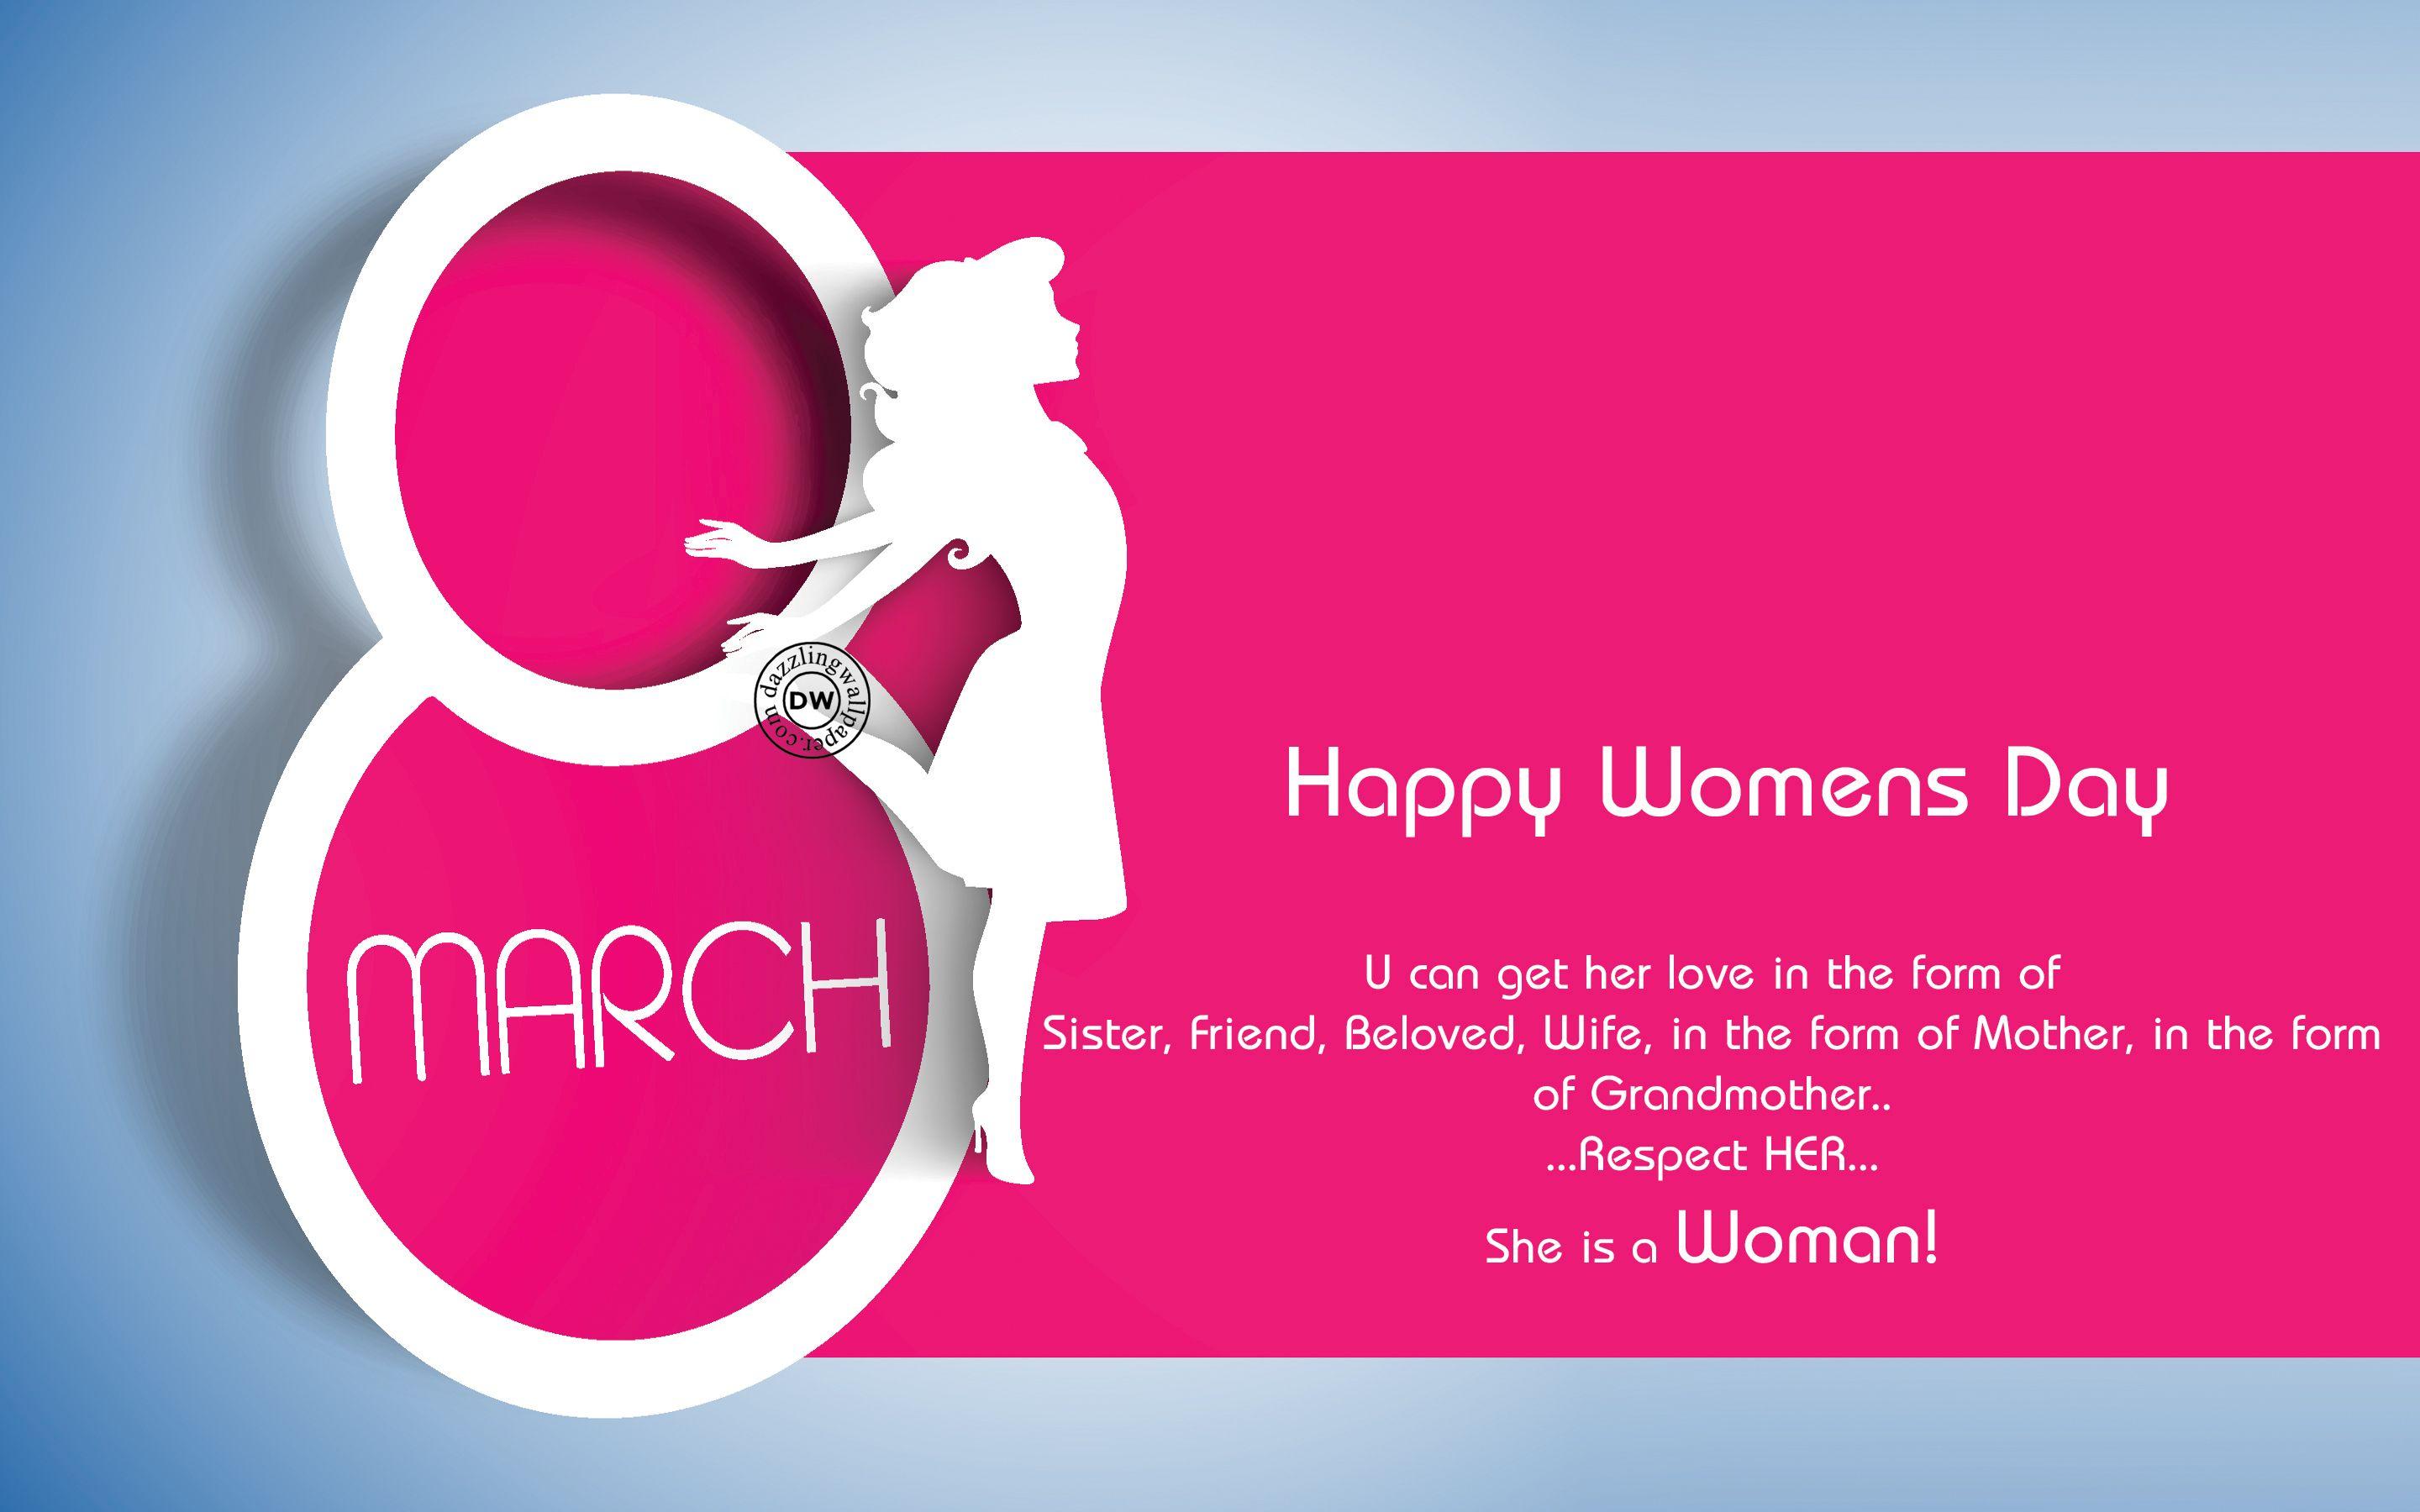 Top # 20+{8th March}* Women's Day Image Wallpaper & Photo {2018}*